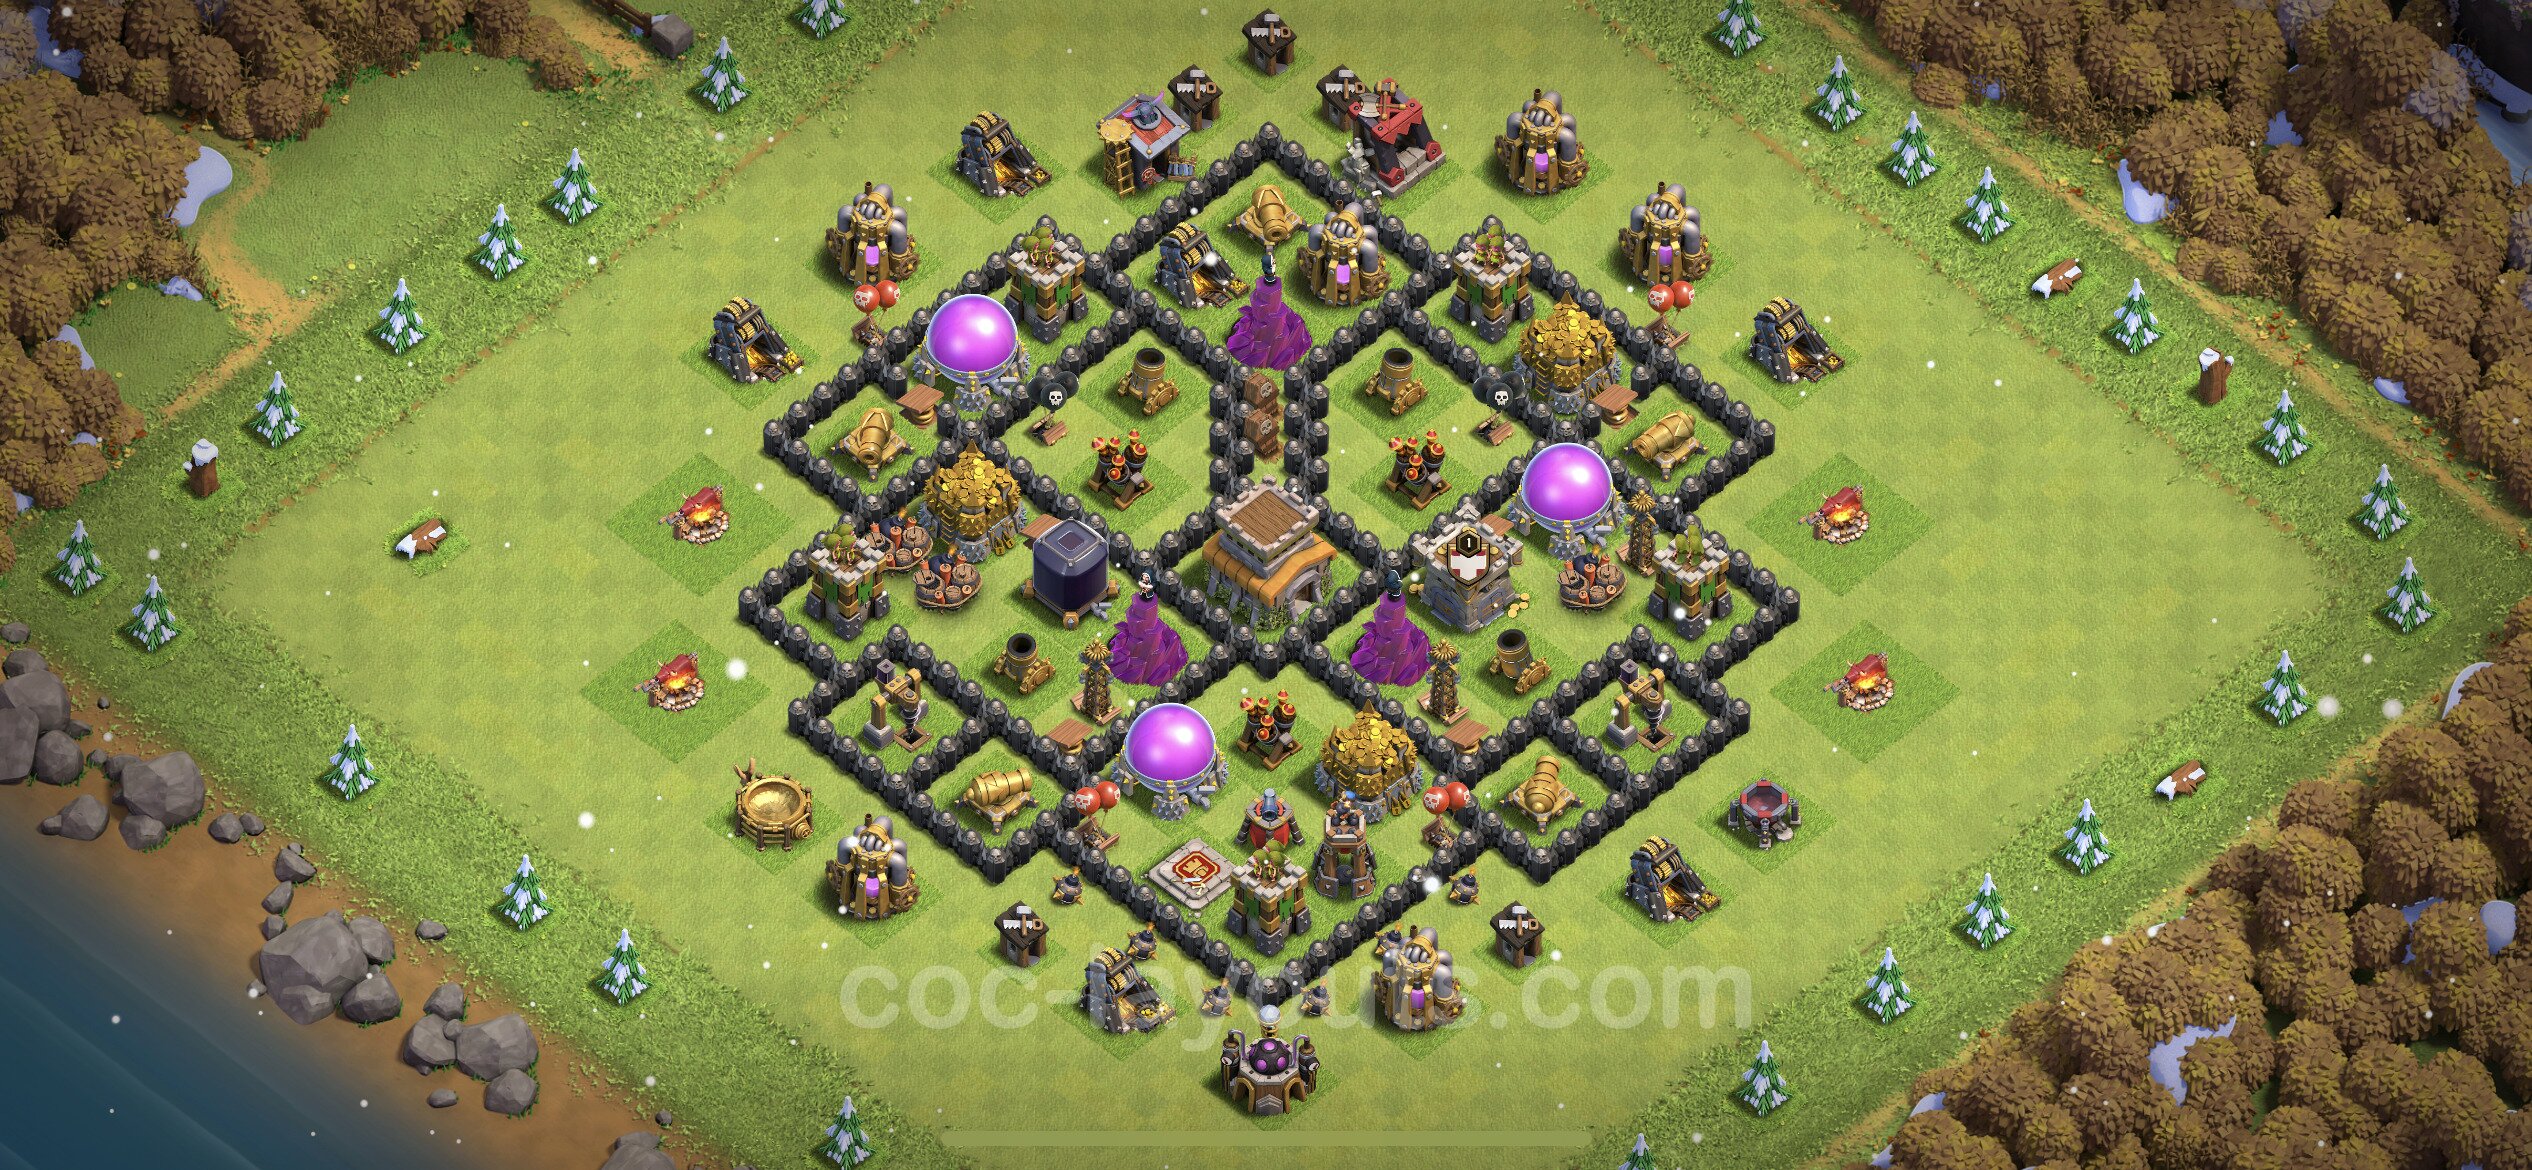 Farming Base TH8 Max Levels with Link, Anti Everything - plan / layout / de...